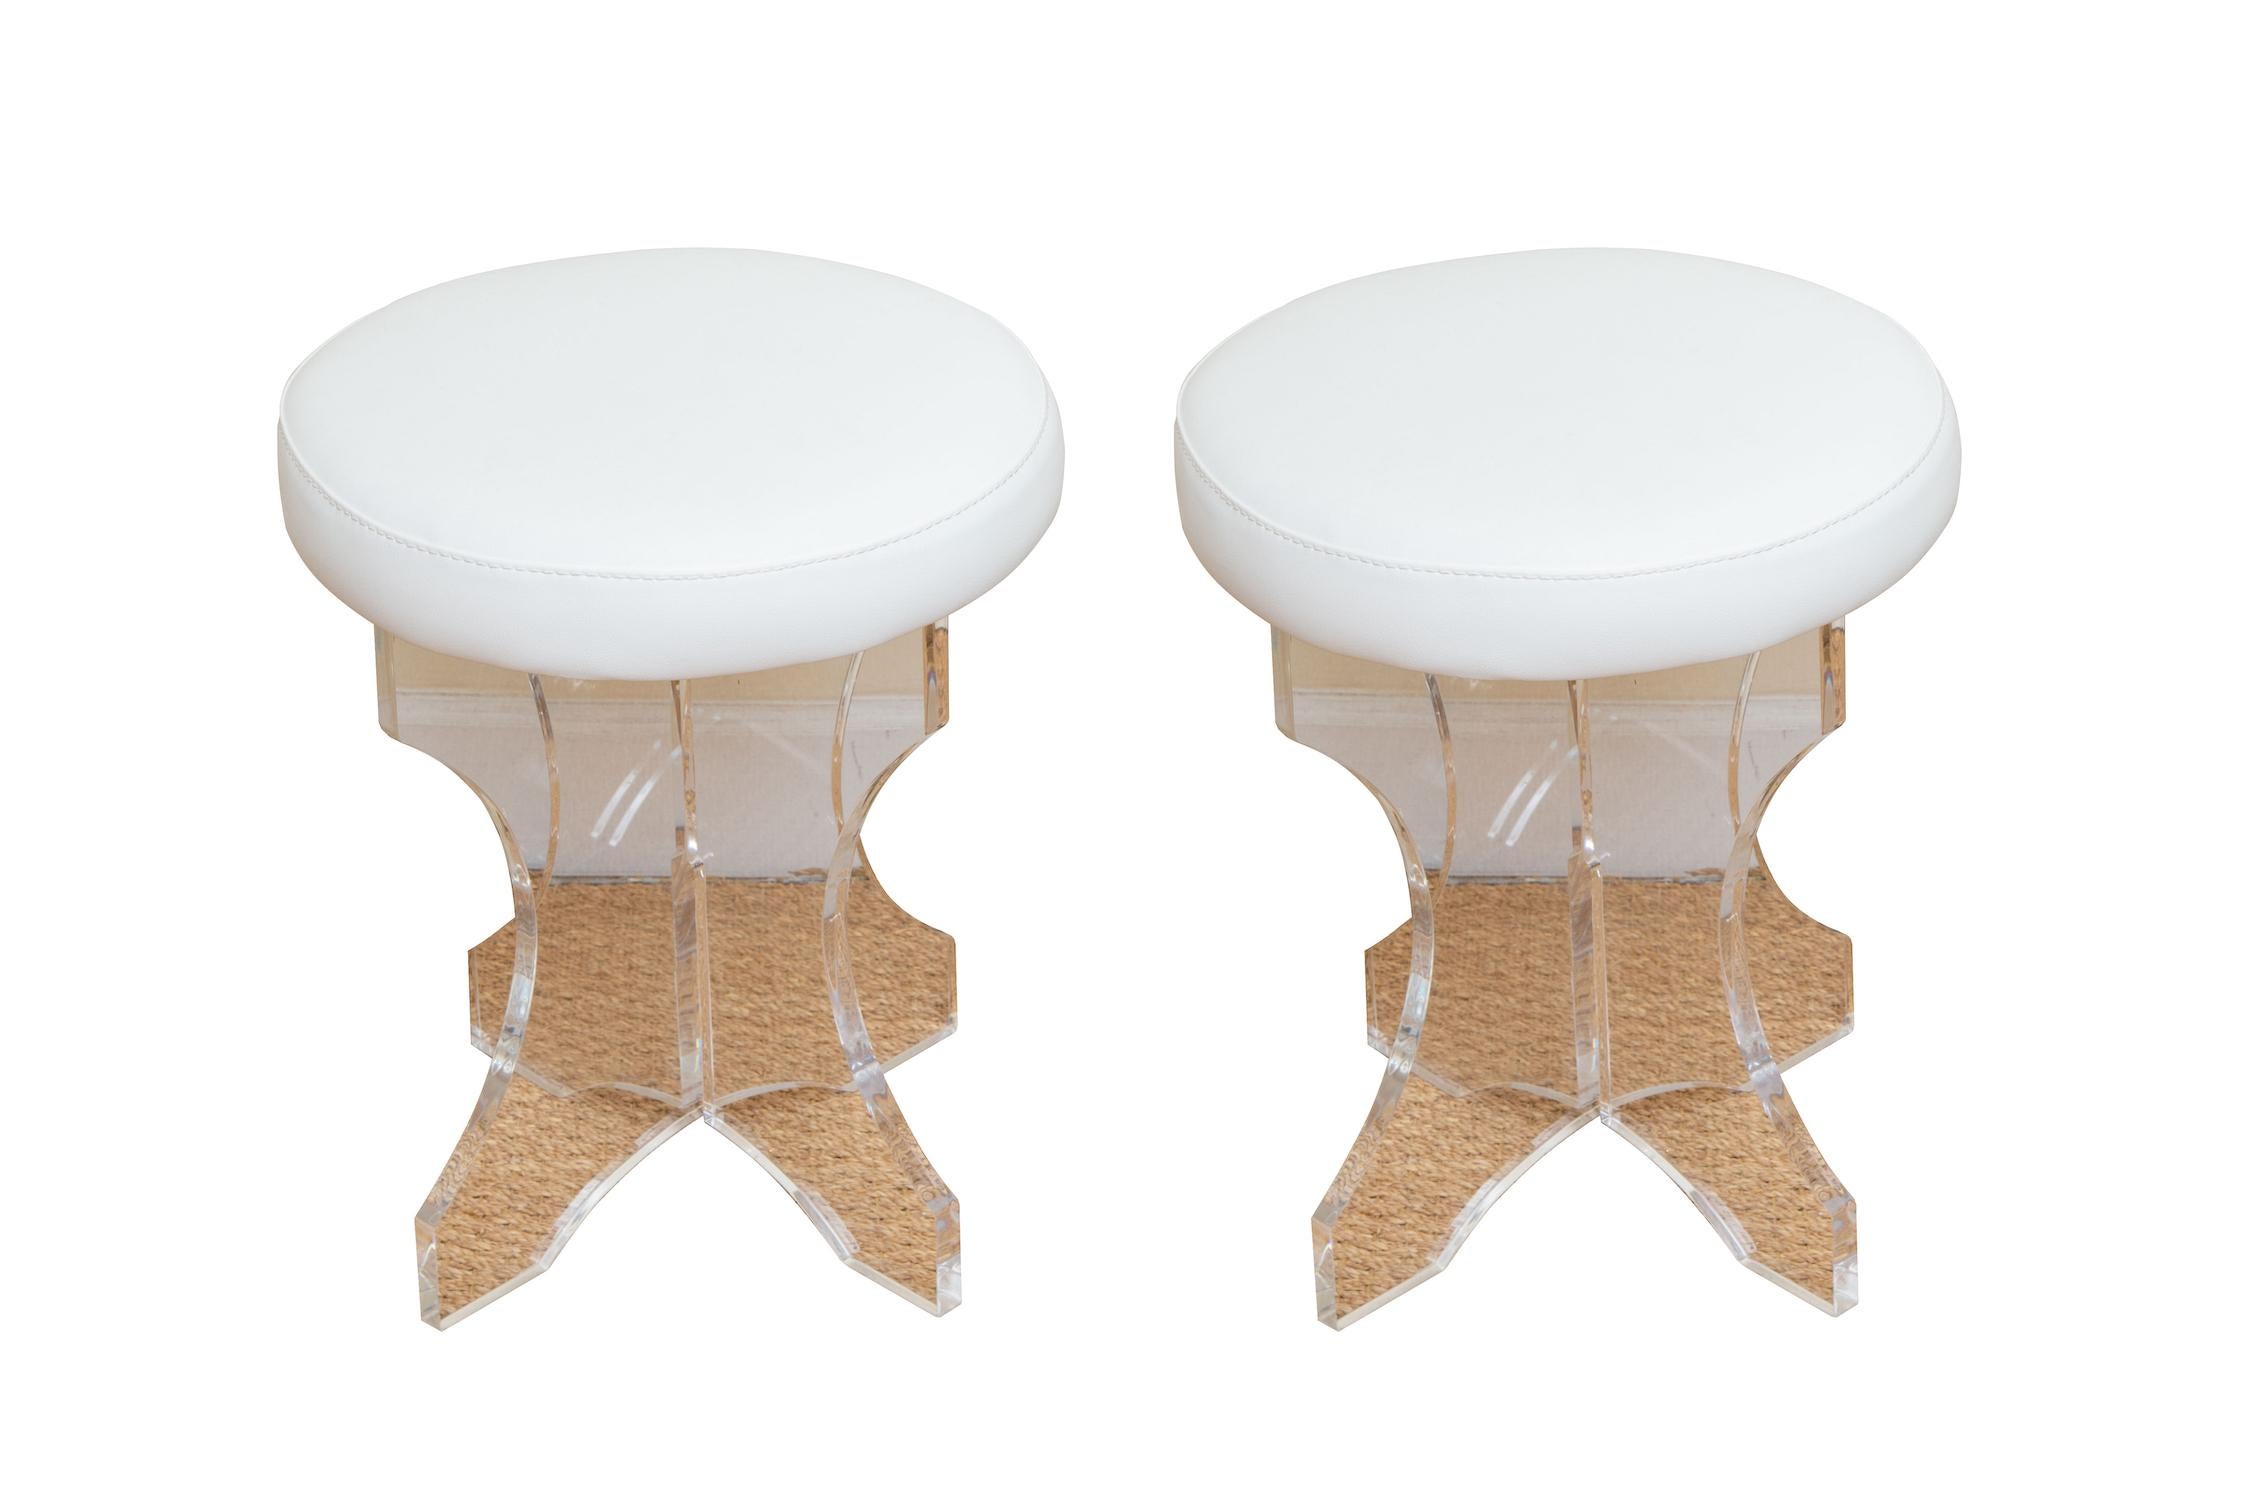 This pair of new old stock lucite vanity stools or small stools are from the 80's. They were manufactured from a lucite company from Miami back at the time. These have never been used but just stored in a warehouse. The white vinyl tops are clean.